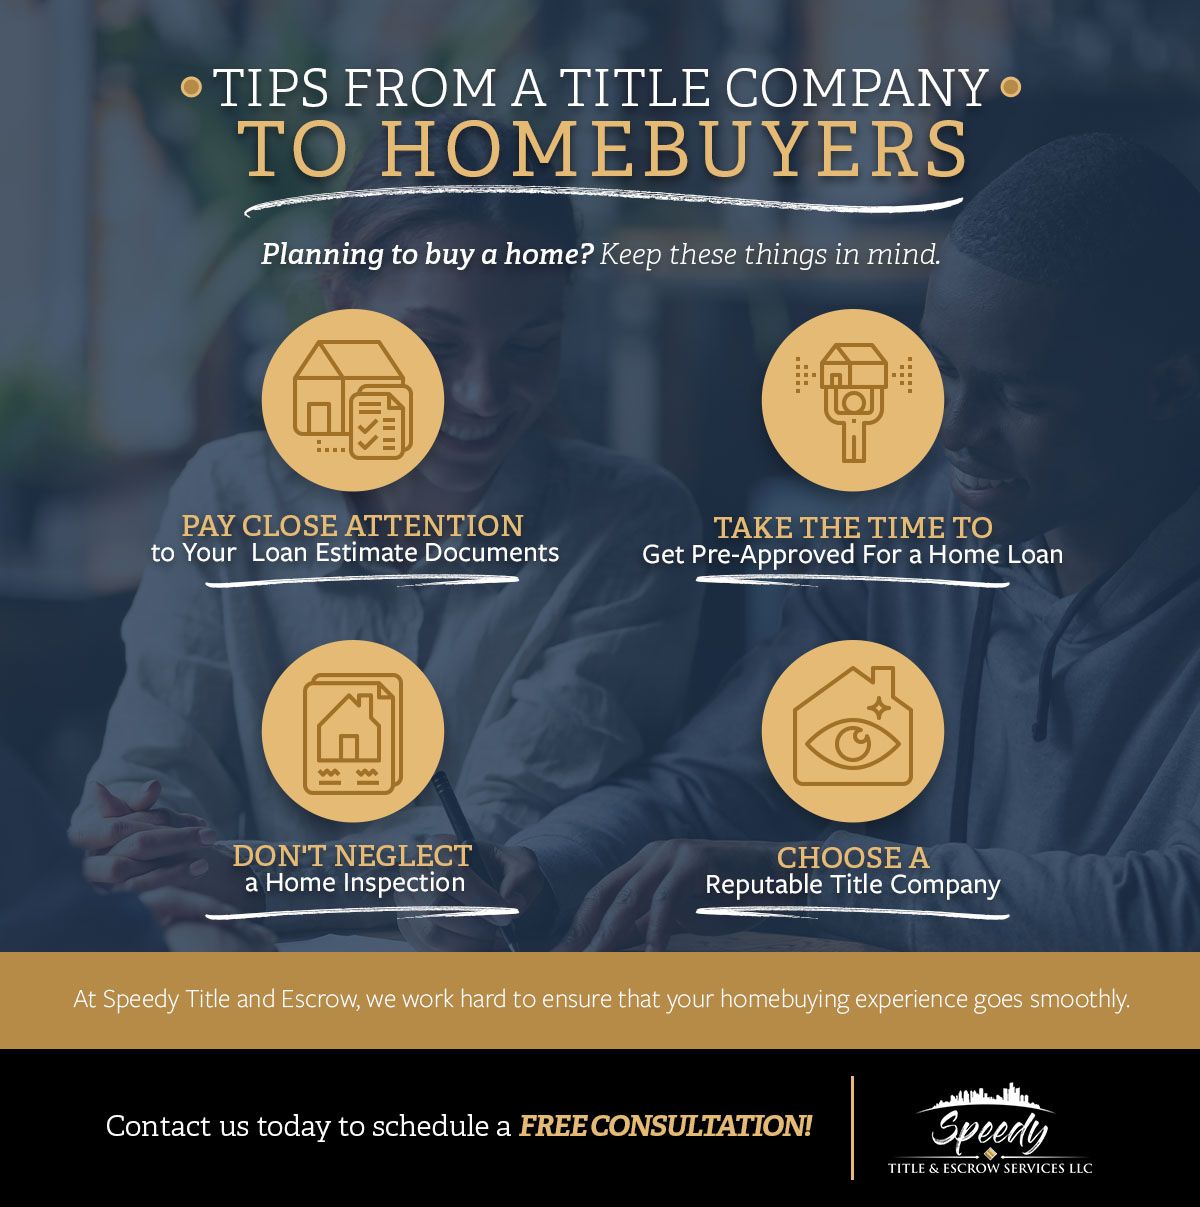 Tips From a Title Company to Homebuyers_IG.jpg